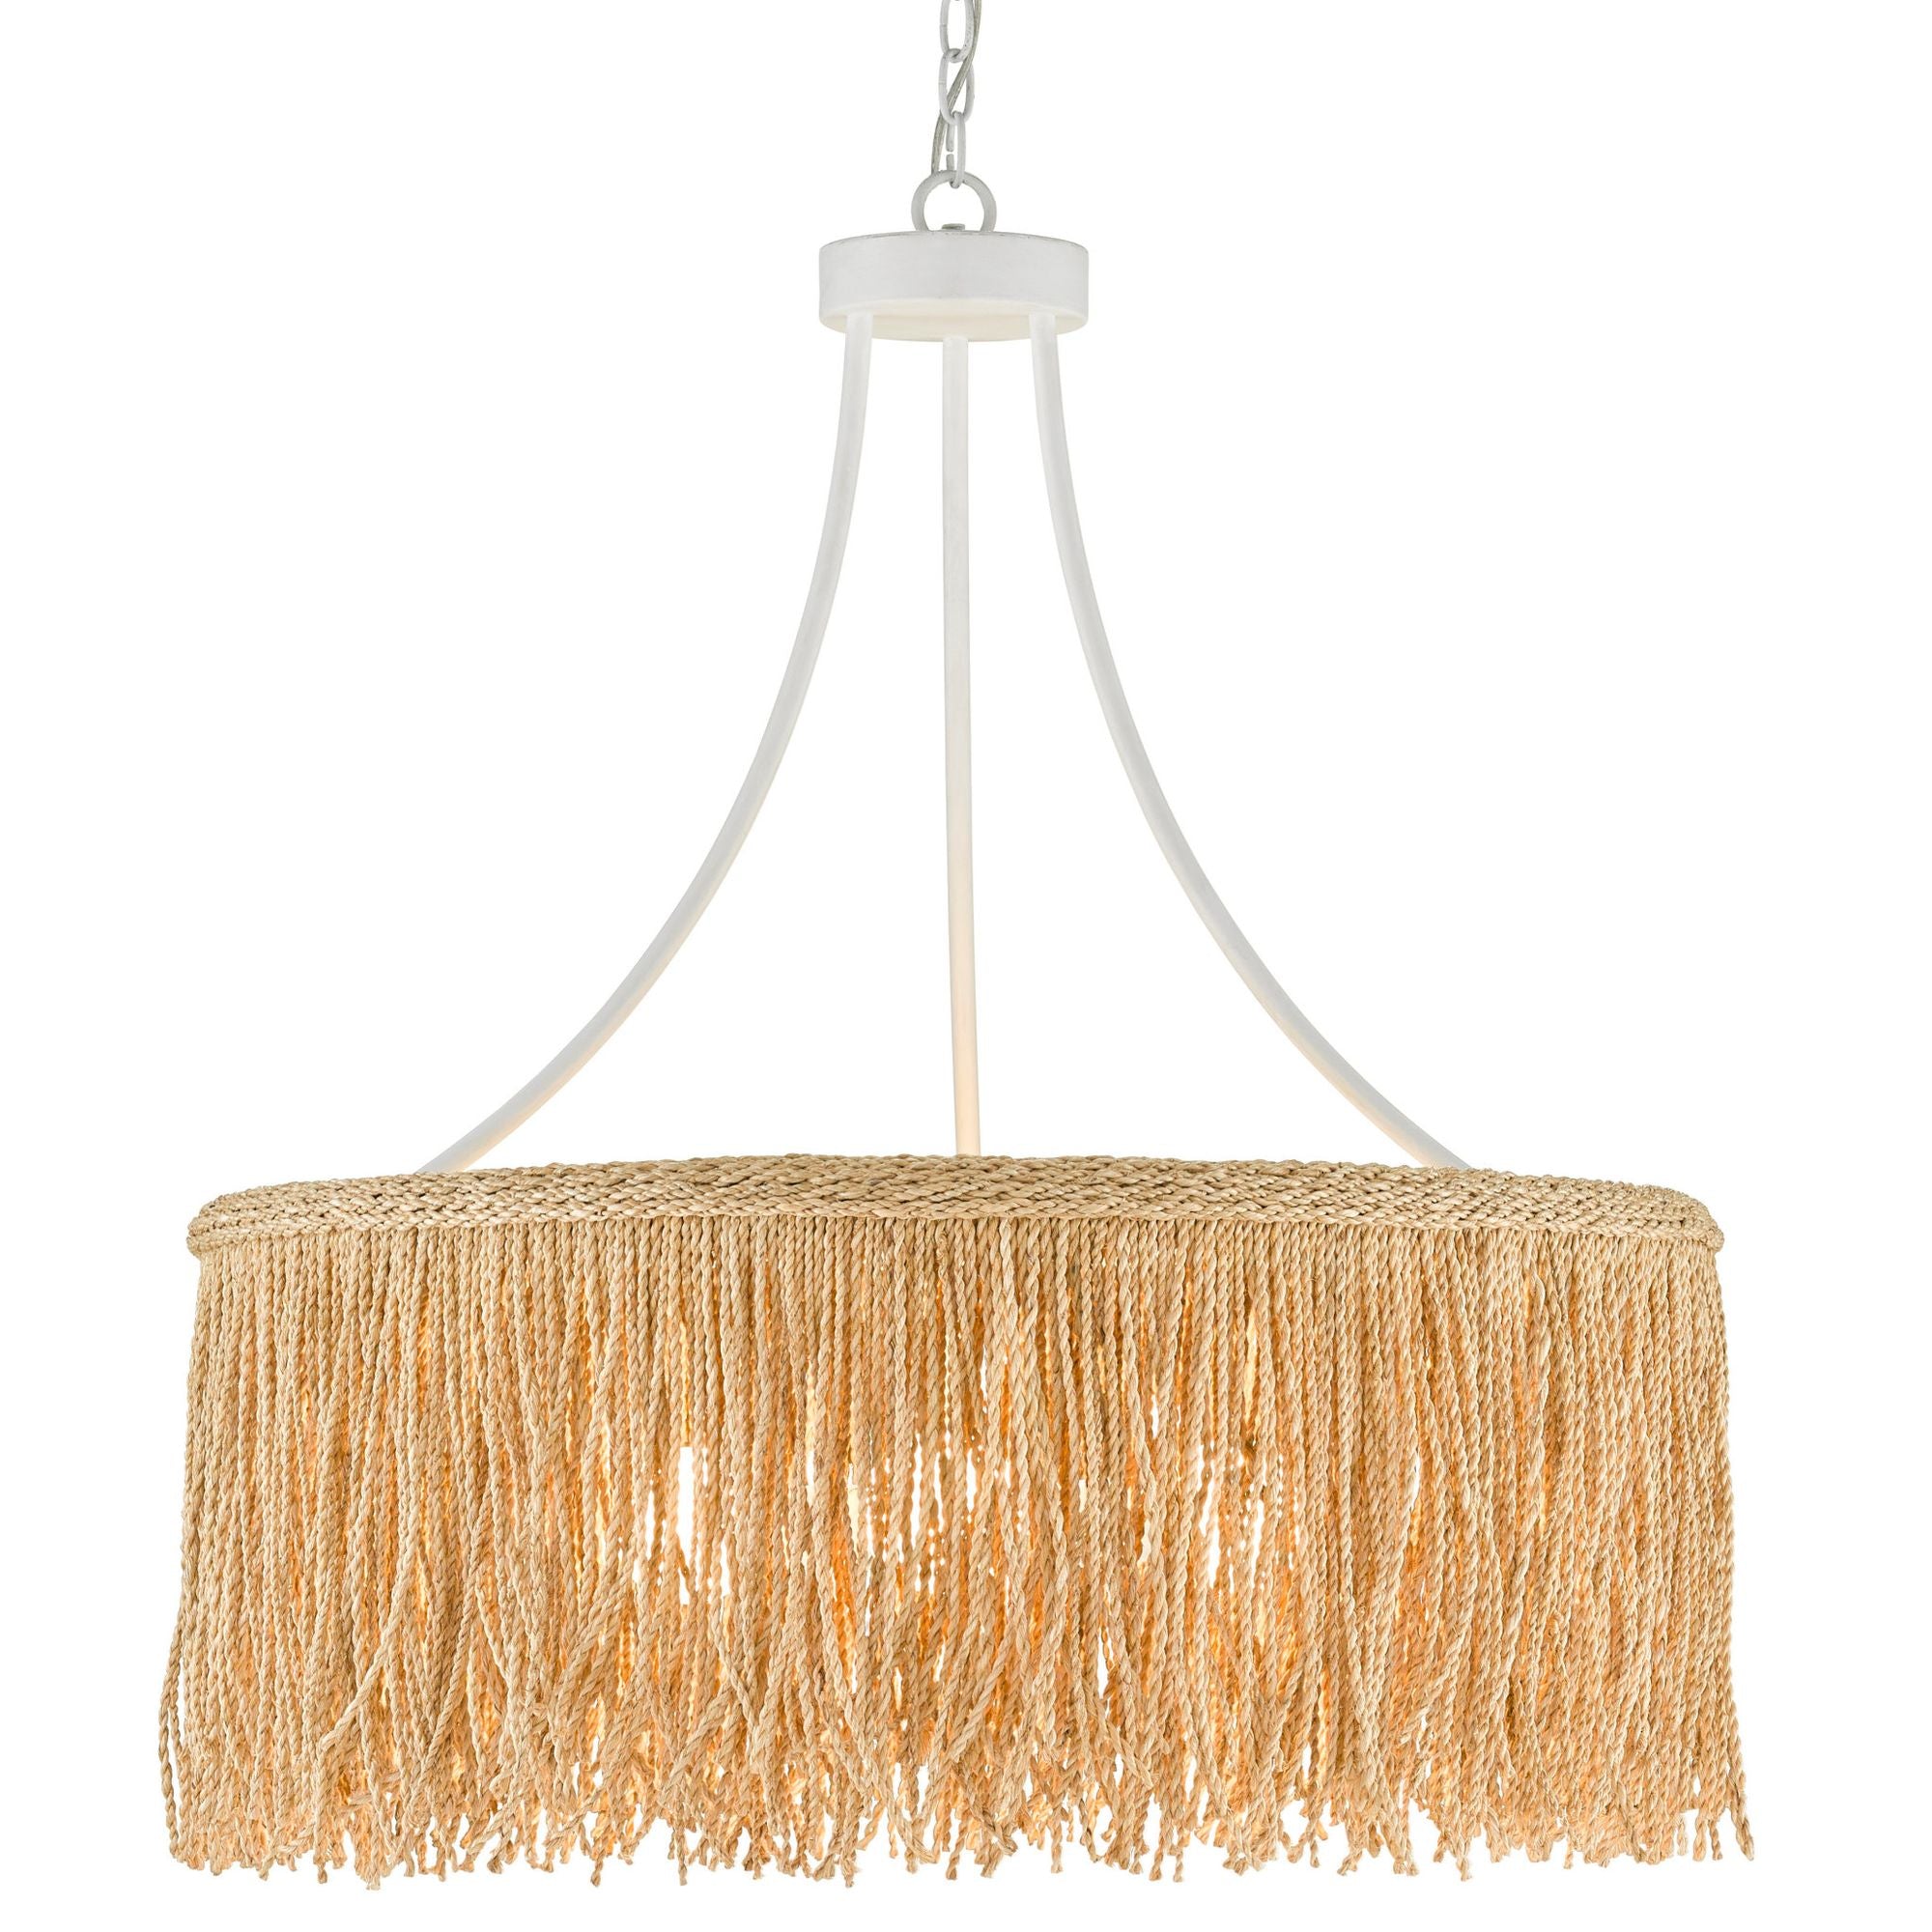 Samoa Rope Chandelier - Gesso White/Natural Rope